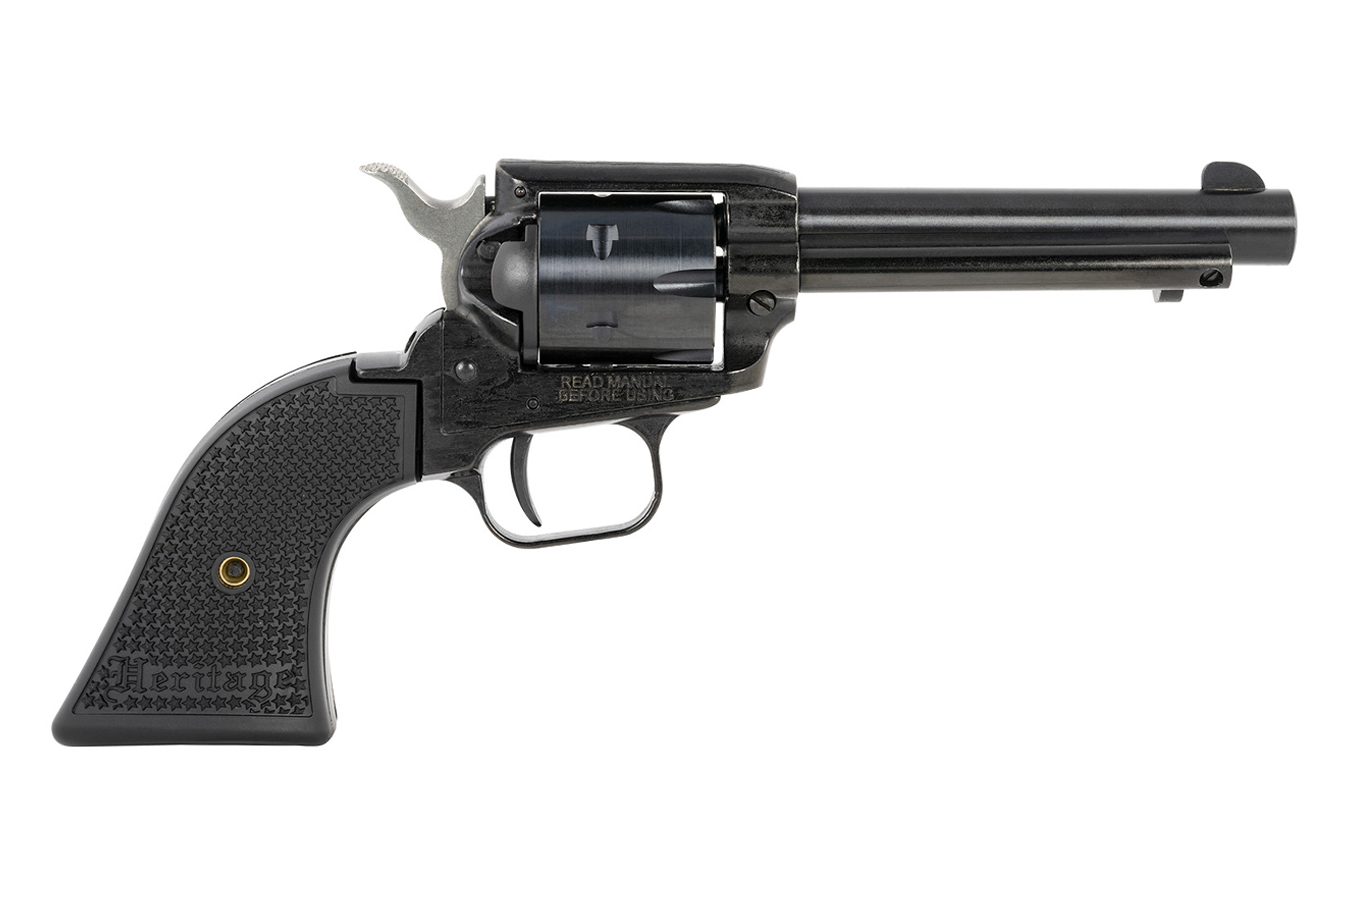 No. 9 Best Selling: HERITAGE ROUGH RIDER 22LR 4.75 BARREL 6 ROUNDS POLY GRIP